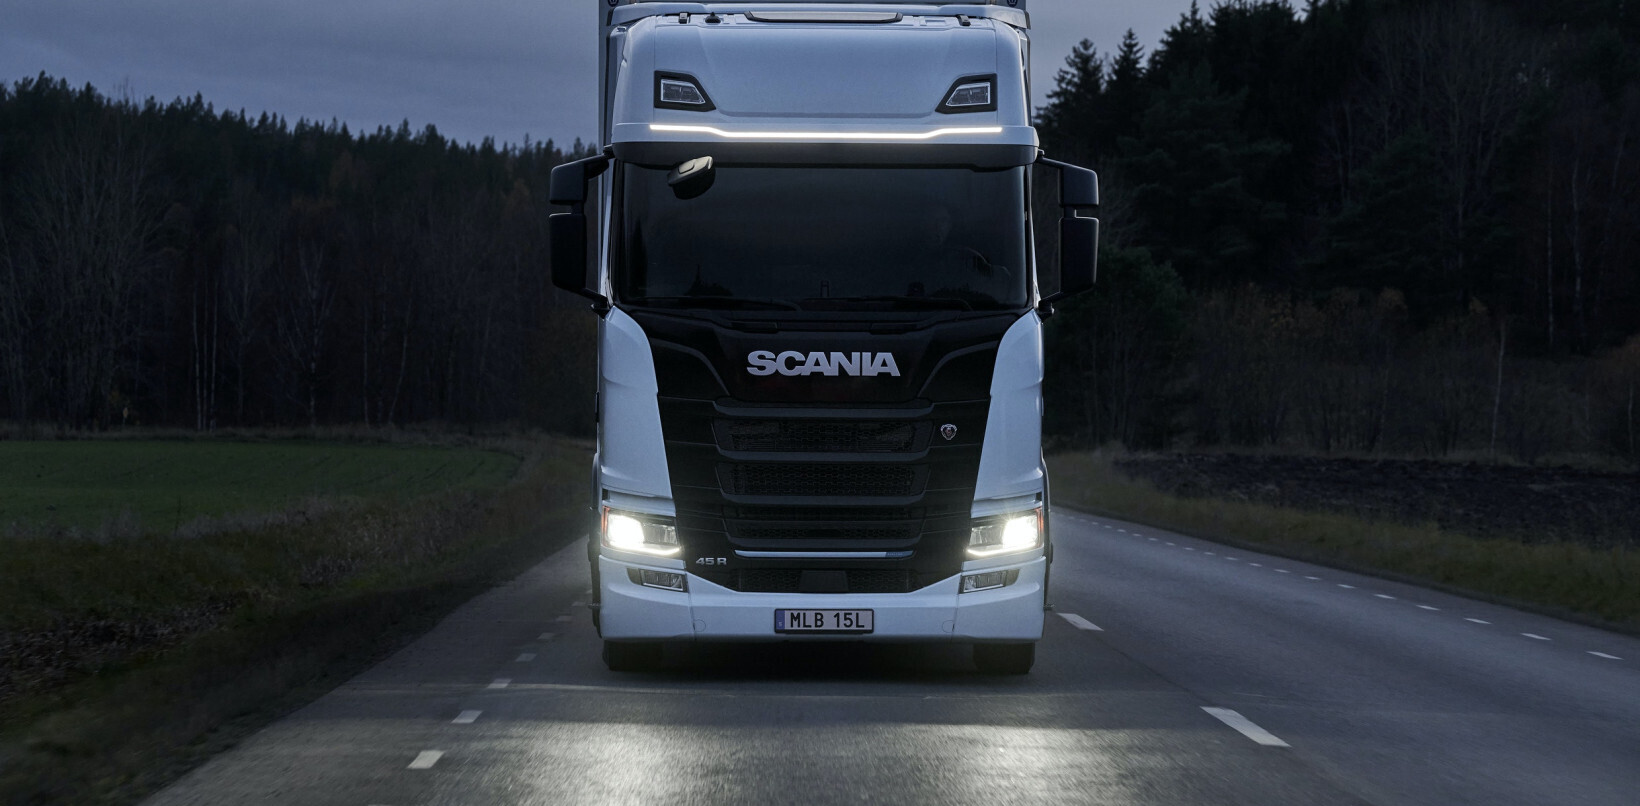 Scania and Northvolt develop battery for electric trucks with 1.5 million km lifespan